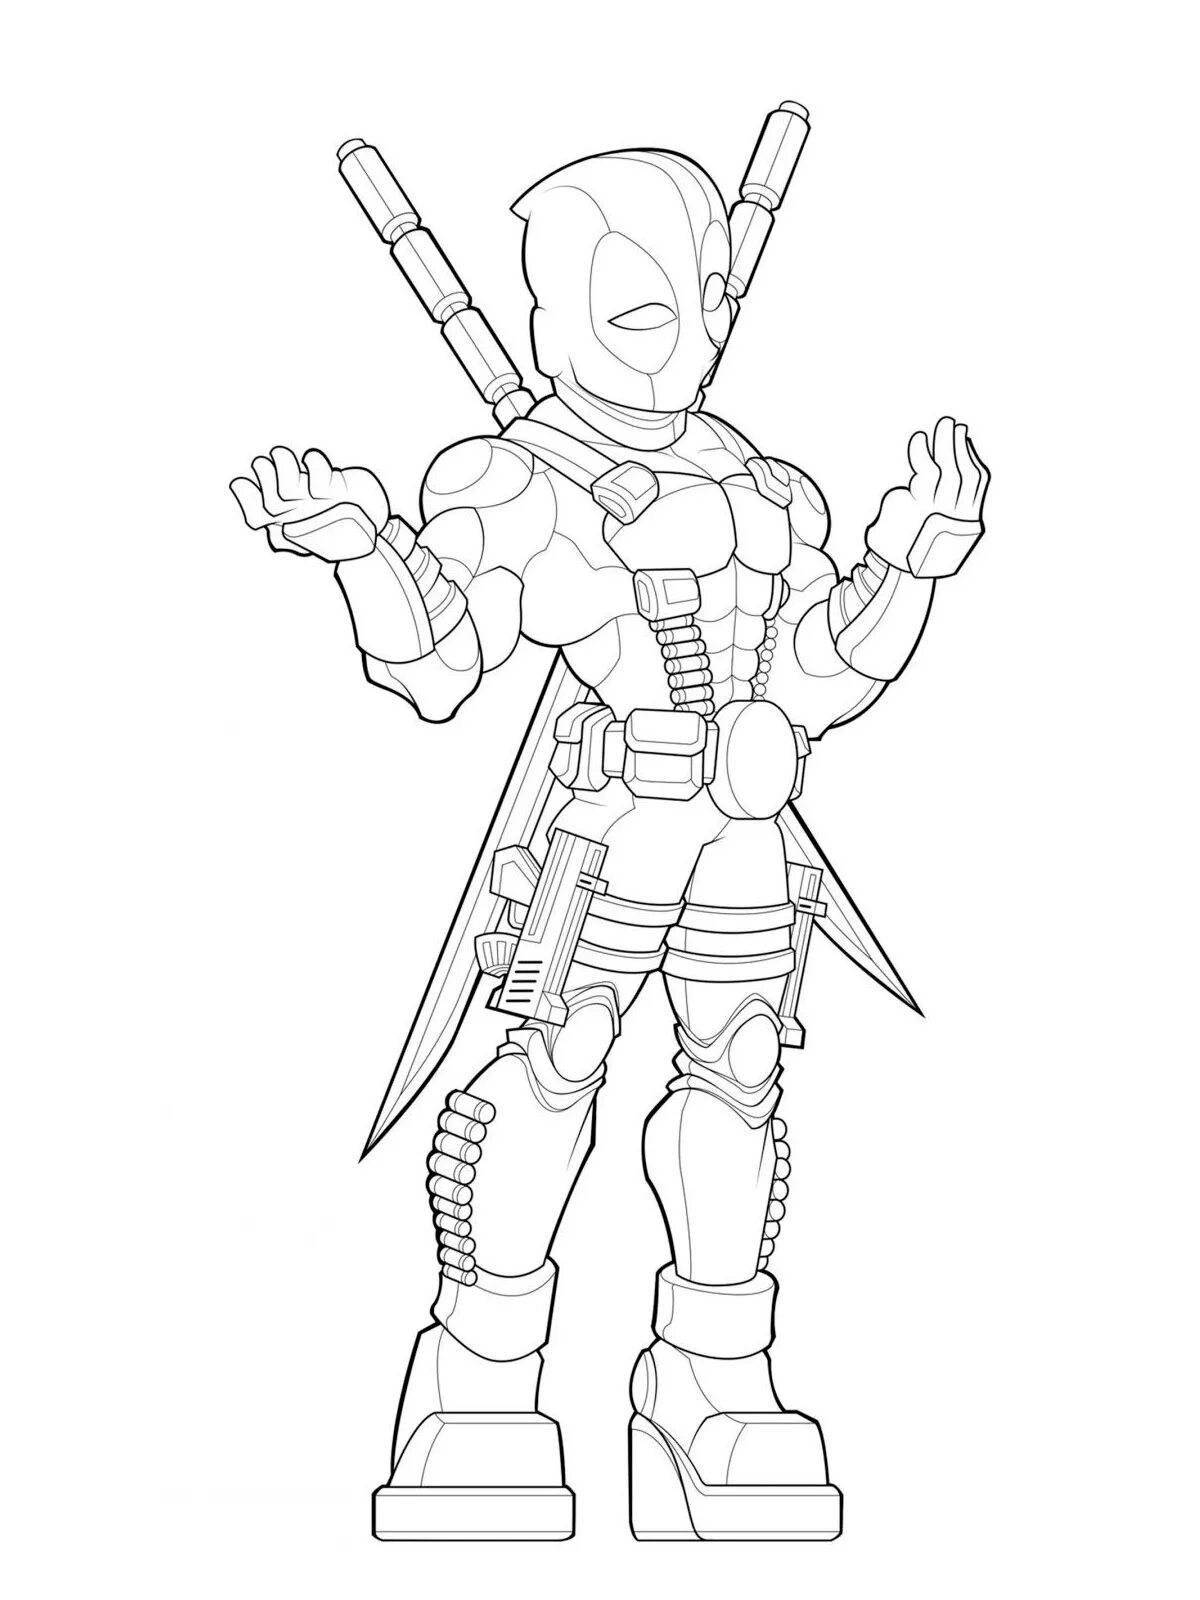 Daring deadpool coloring page